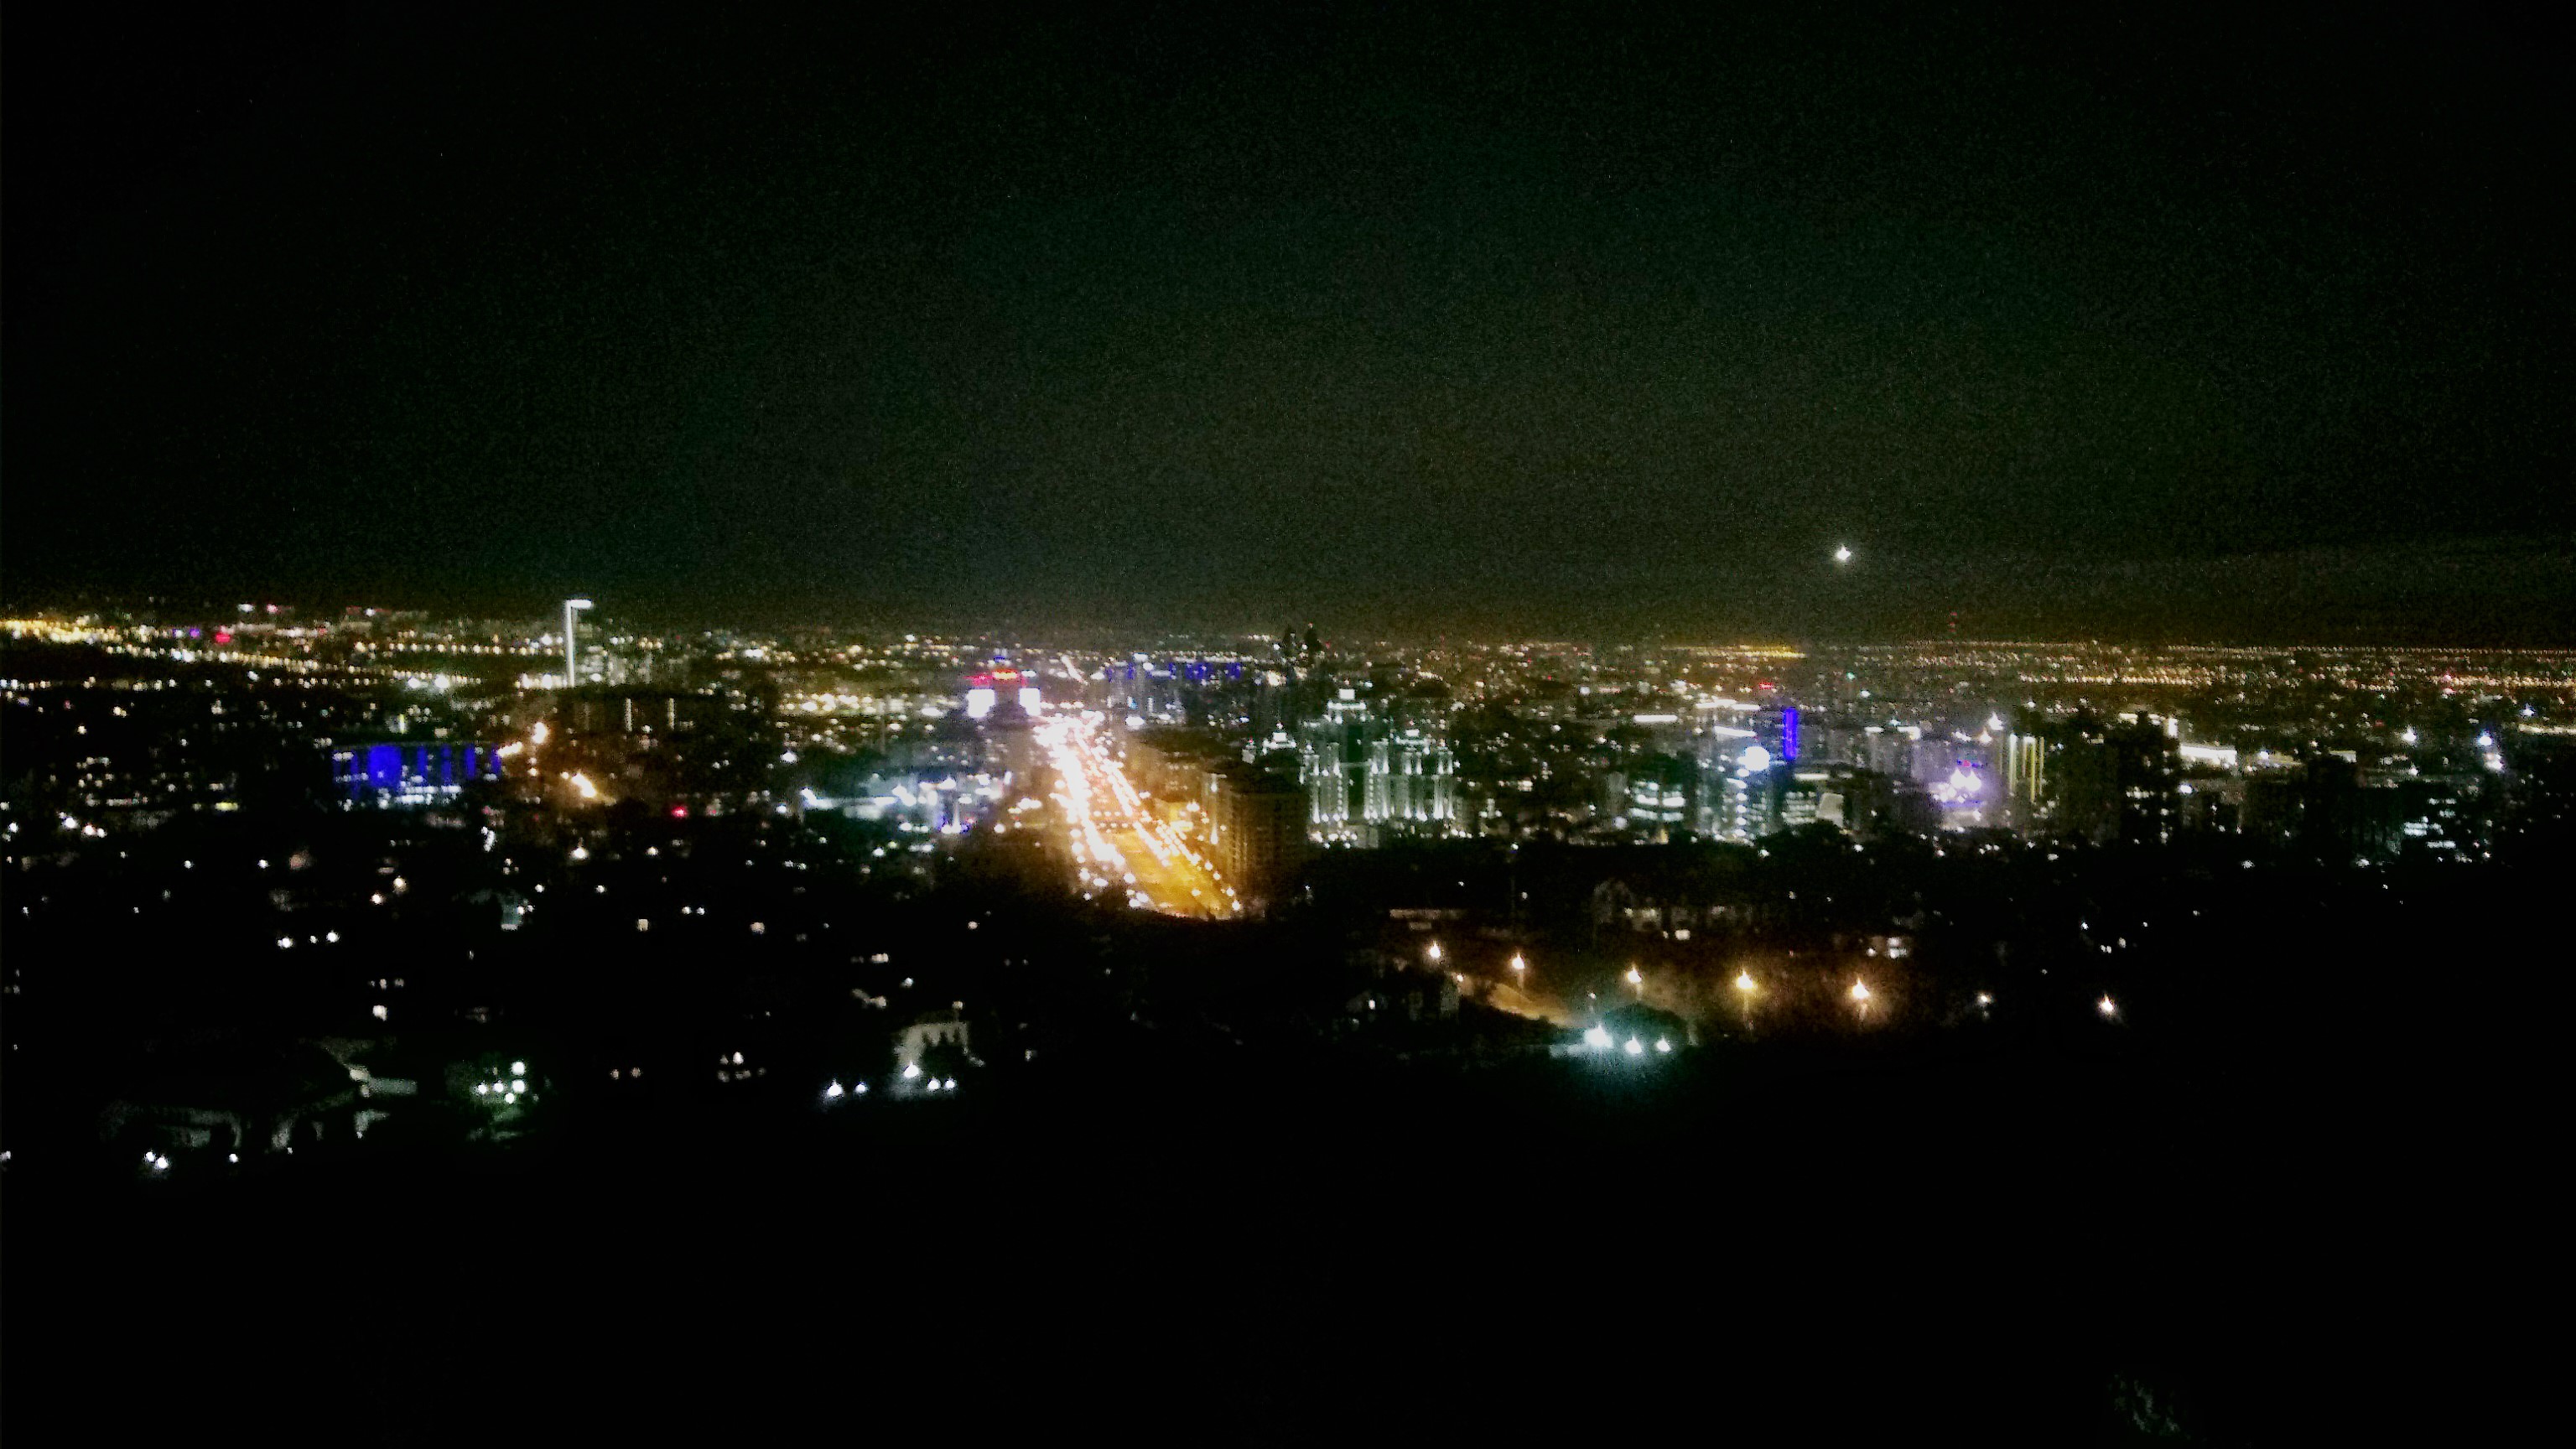 Stunning view of ALmaty, the former Kazakh capital at night